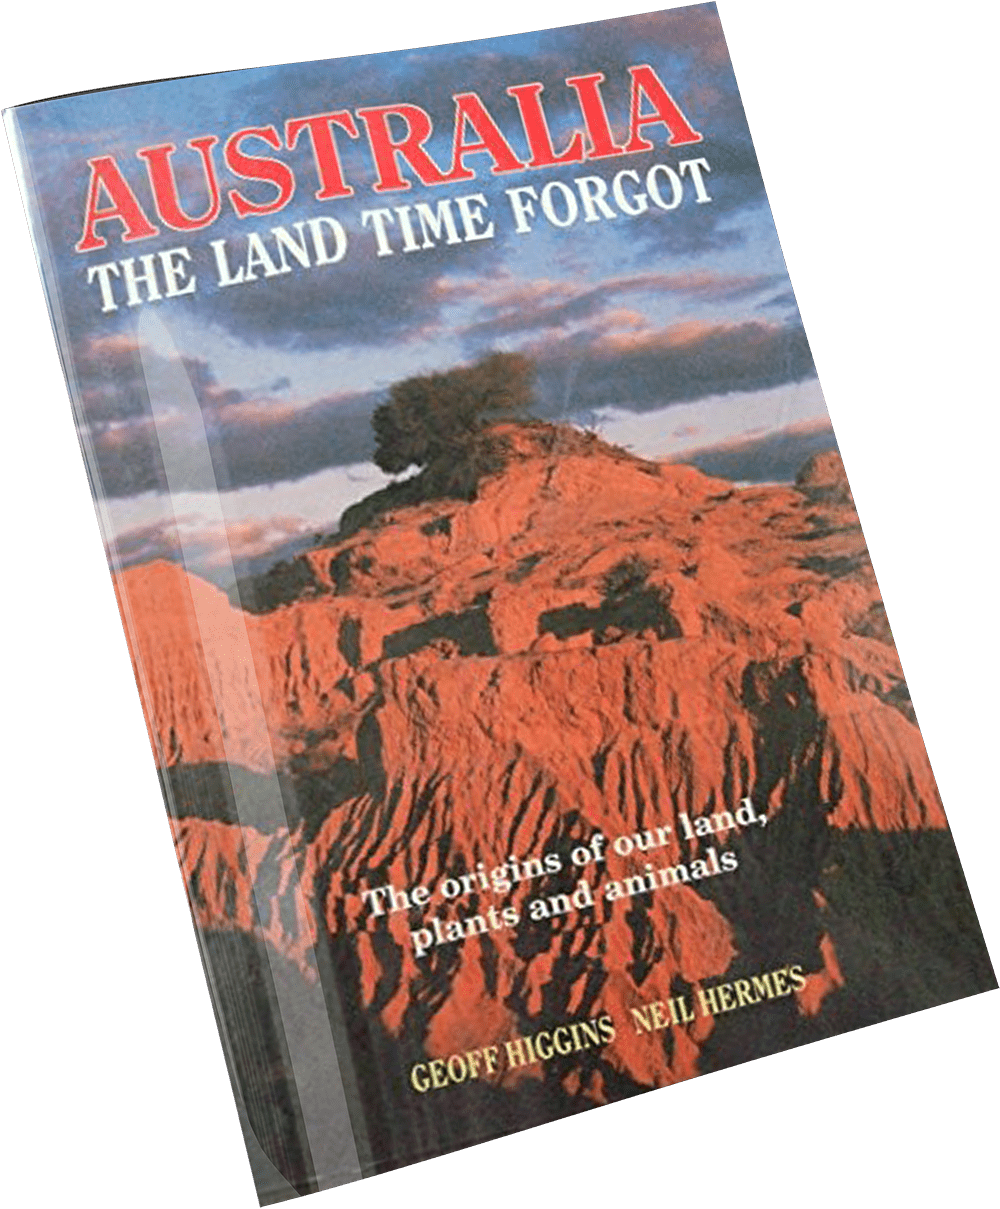 Neil Hermes Book: Australia The Land Time Forgot – The origins of our land, plants and animals